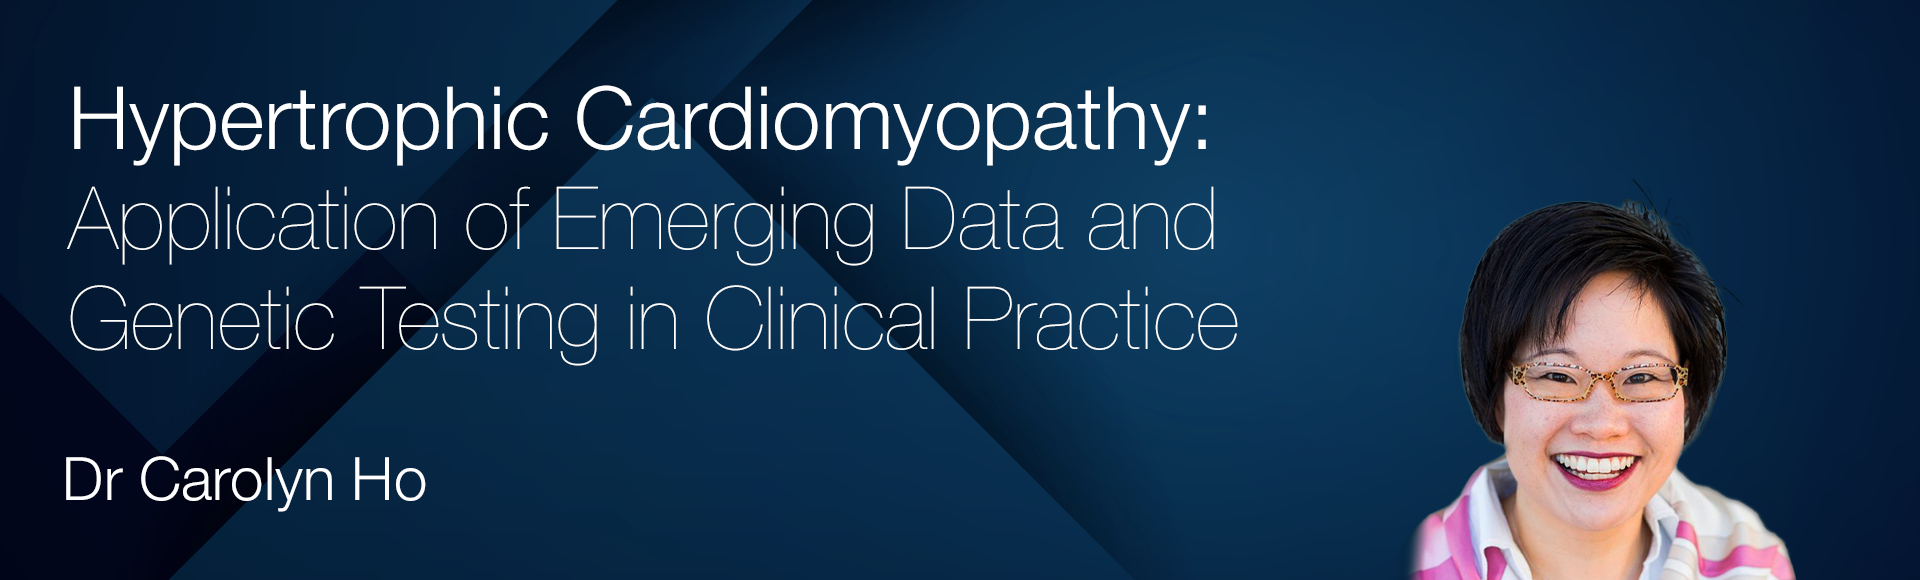 Hypertrophic Cardiomyopathy: Application of Emerging Data and Genetic Testing in Clinical Practice 